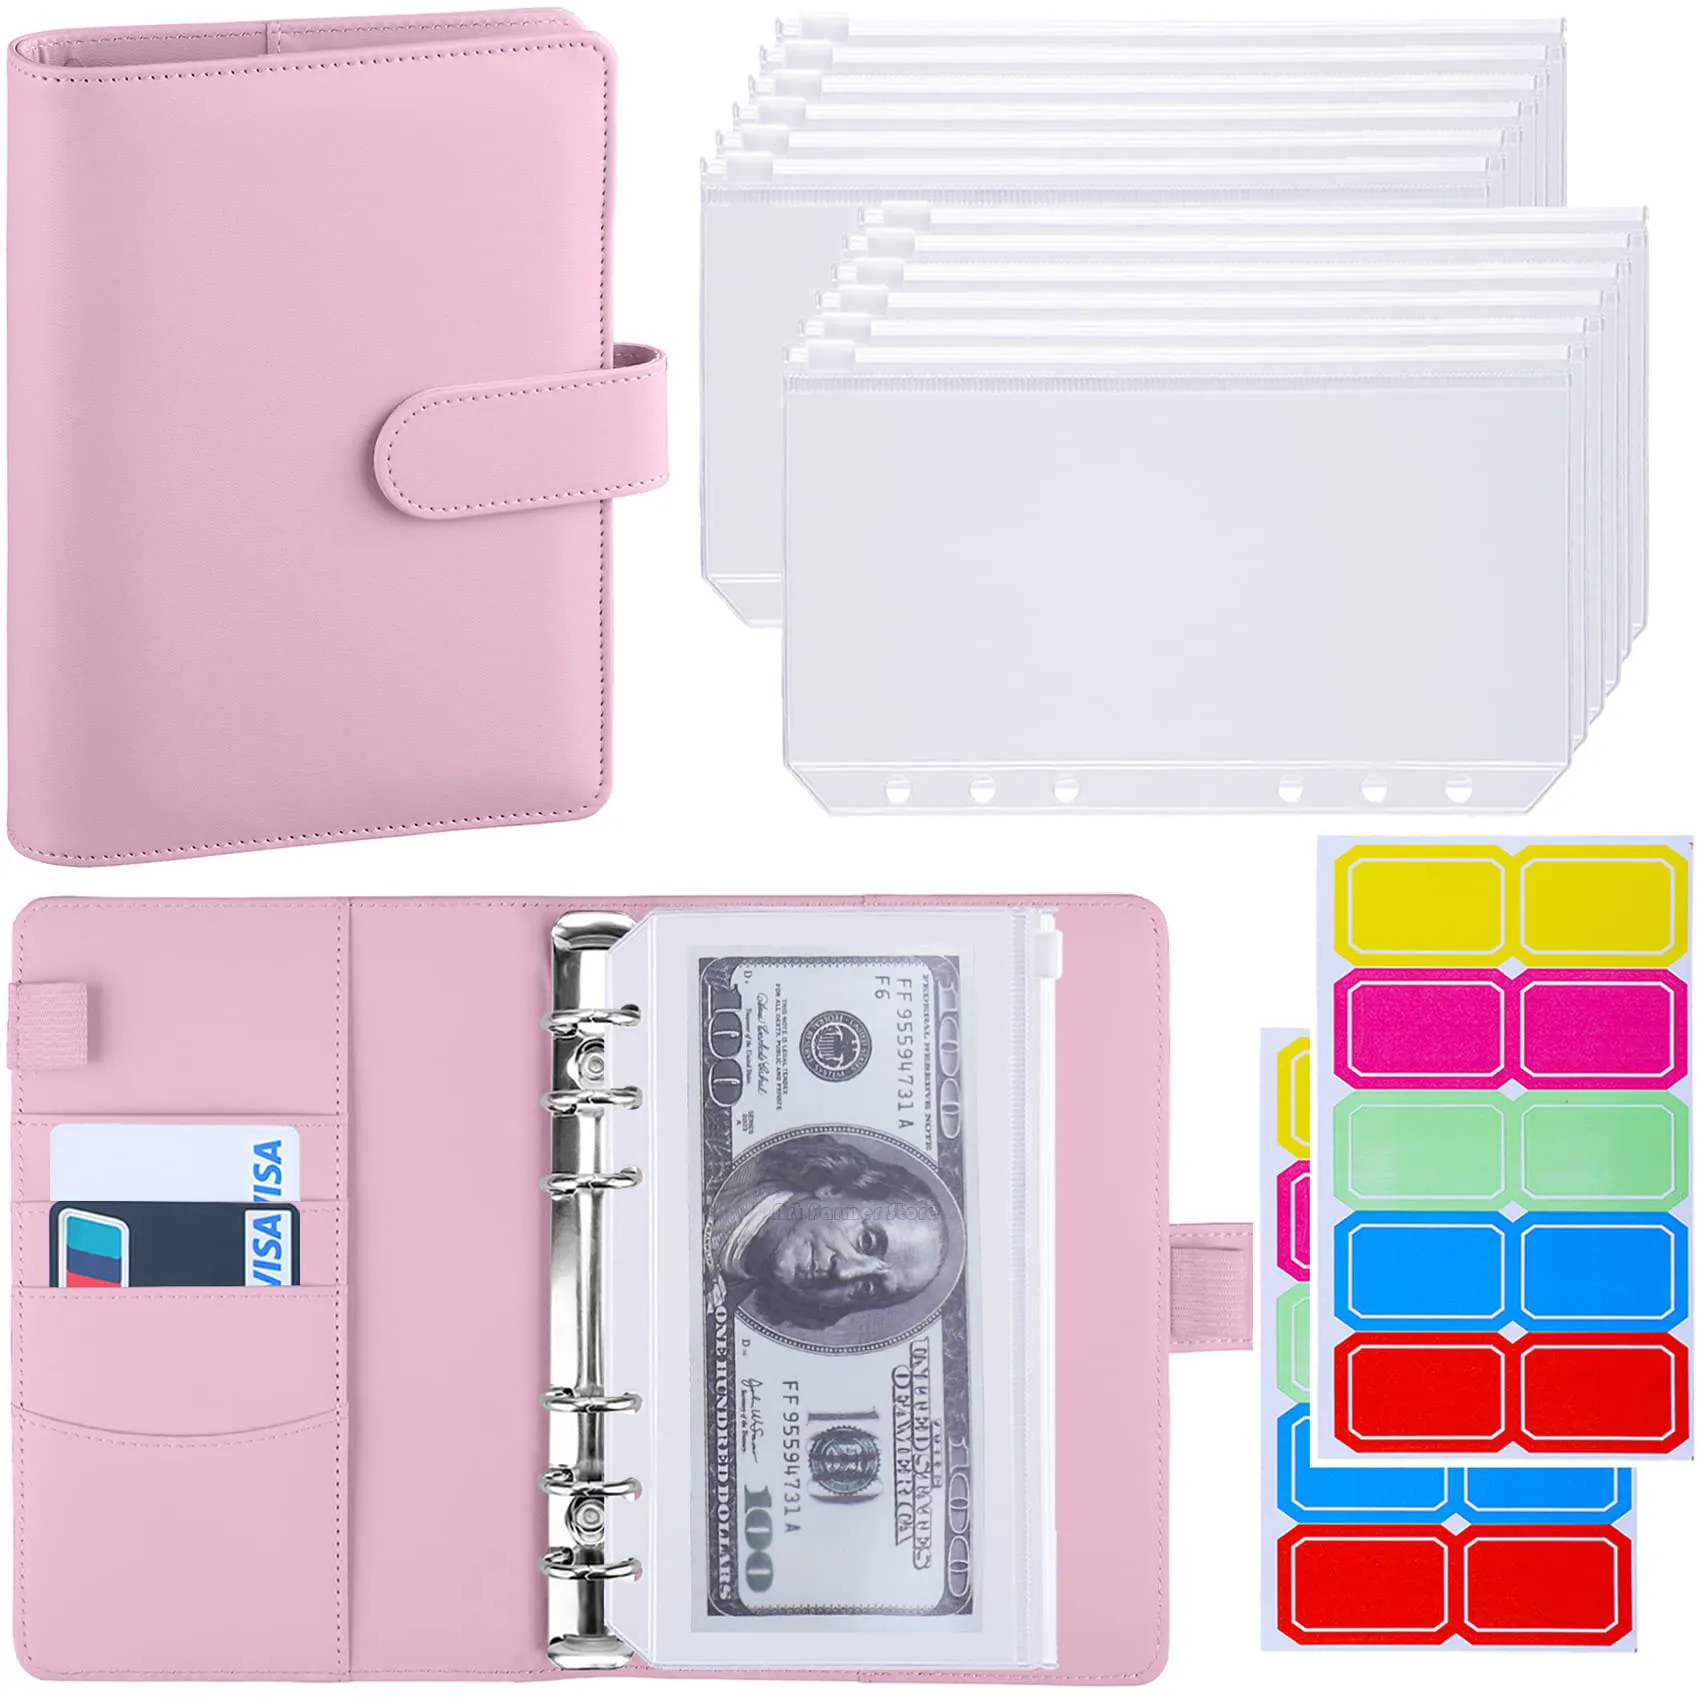 A6 Budget Binder with Zipper Envelope Cash Budget Planning This